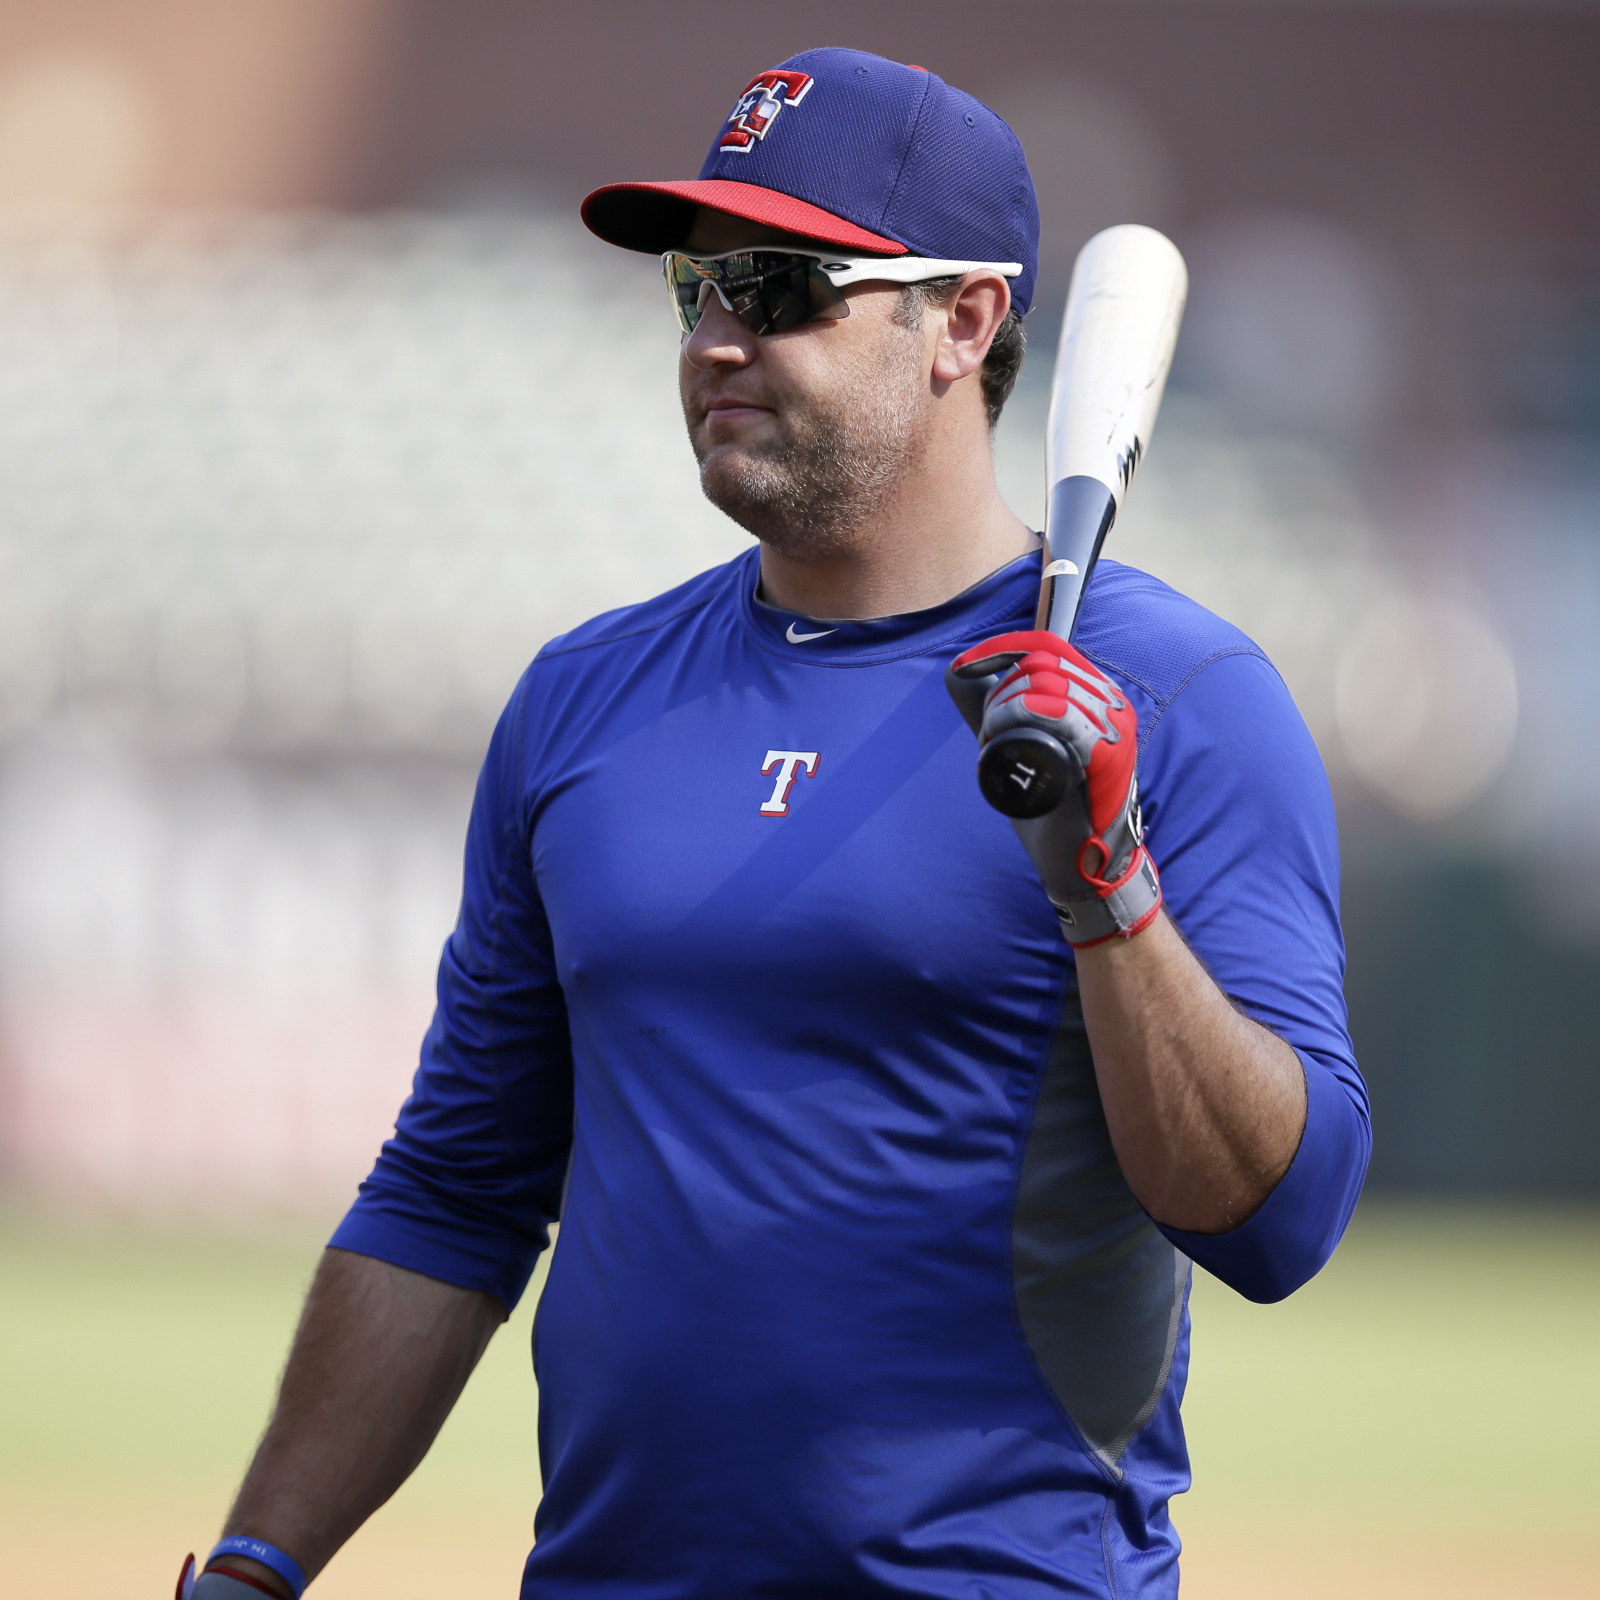 Rockies trying to sign former all-star Lance Berkman – The Denver Post